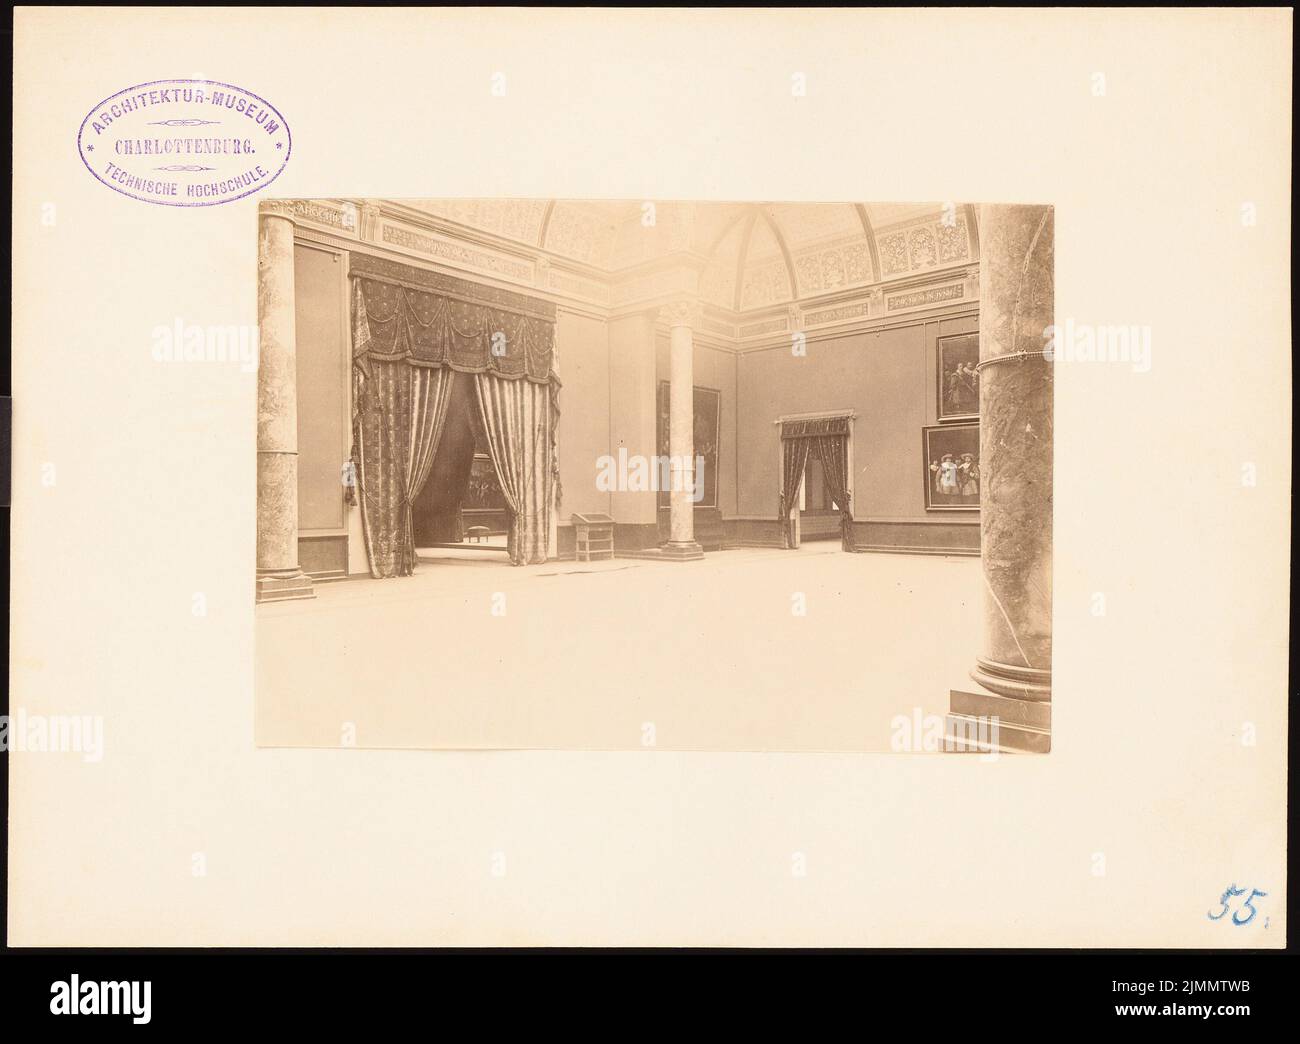 Cuypers P. J. H. (1827-1921), Reichsmuseum, Amsterdam (1885): Entrance to the room with the 'Nachtwake' by Rembrandt. Photo on paper, on cardboard, 20.1 x 27.4 cm (including scan edges) Stock Photo